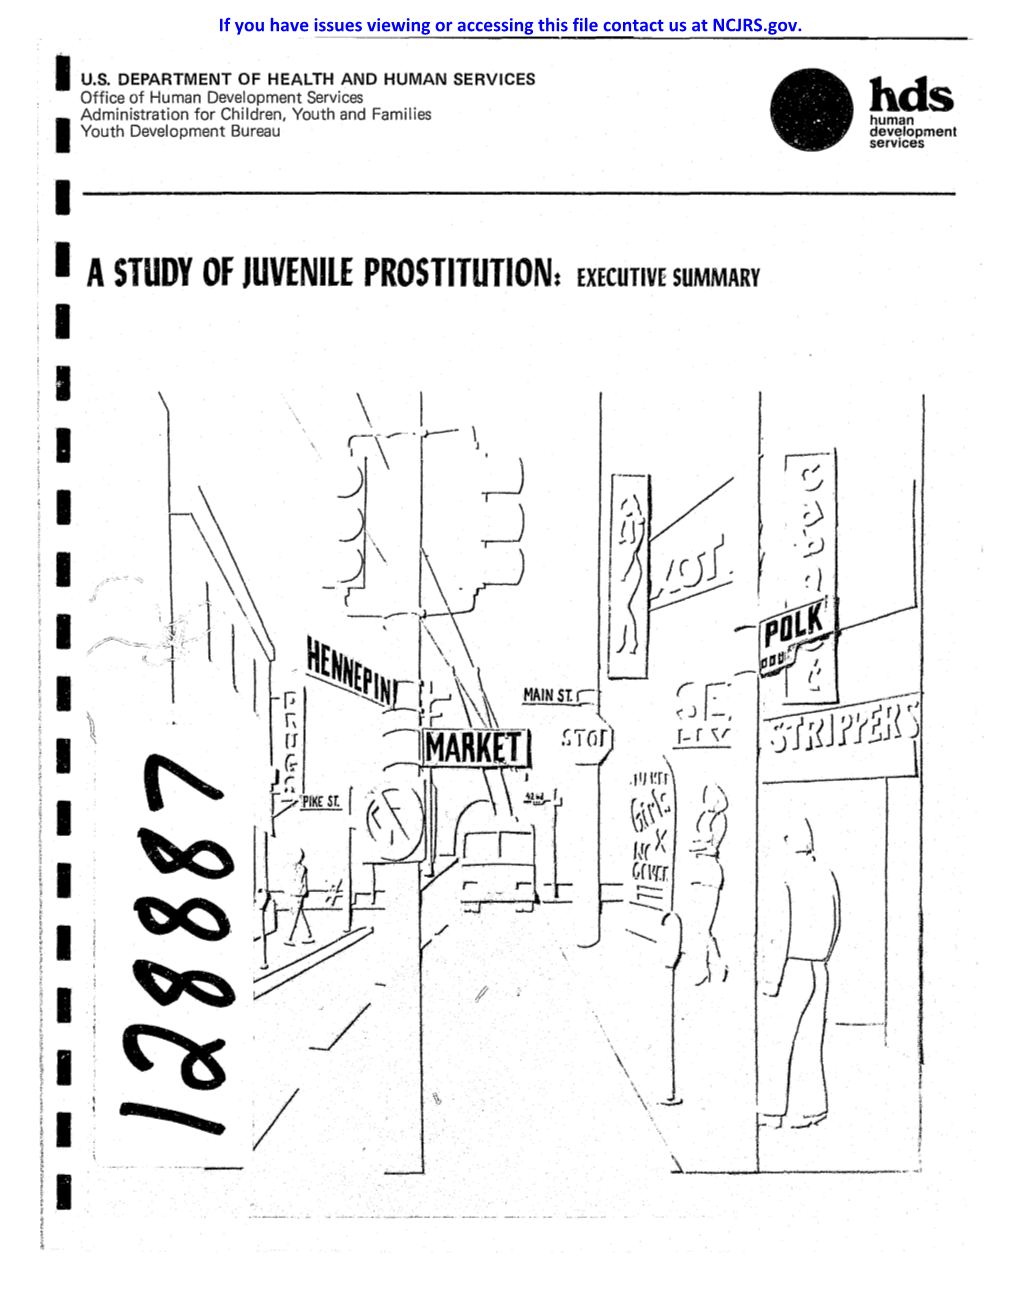 A Study of Juvenile Prostitution